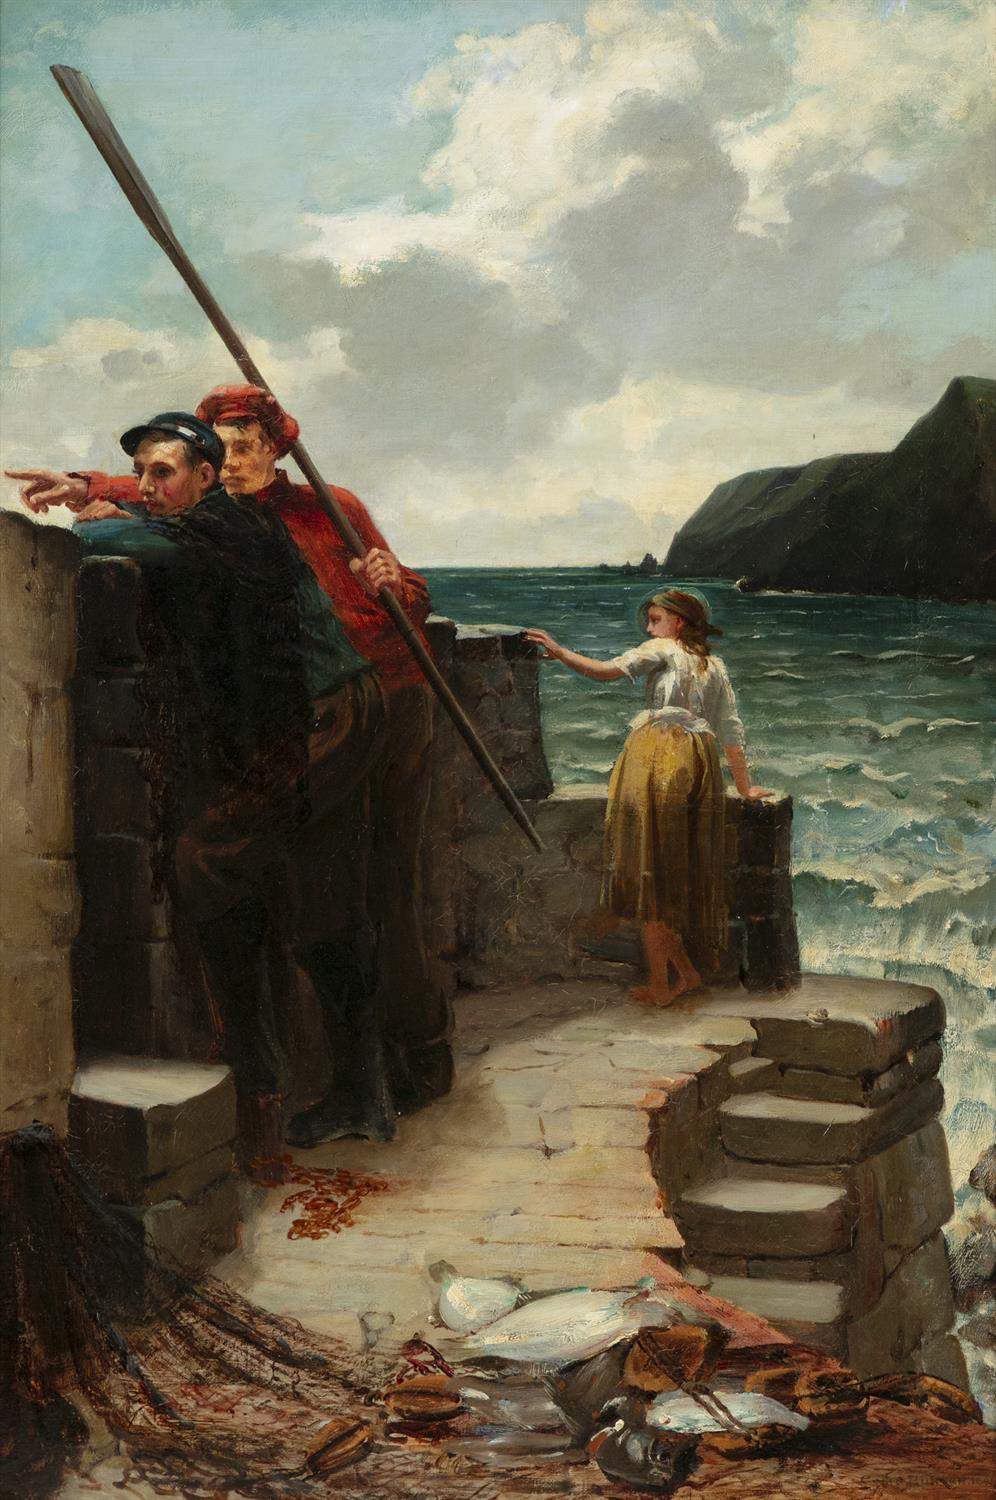 COLIN HUNTER A.R.A (1841-1904) 'A Strange Craft' (1891) Oil on canvas, 76 x 51cm Signed and - Image 2 of 4